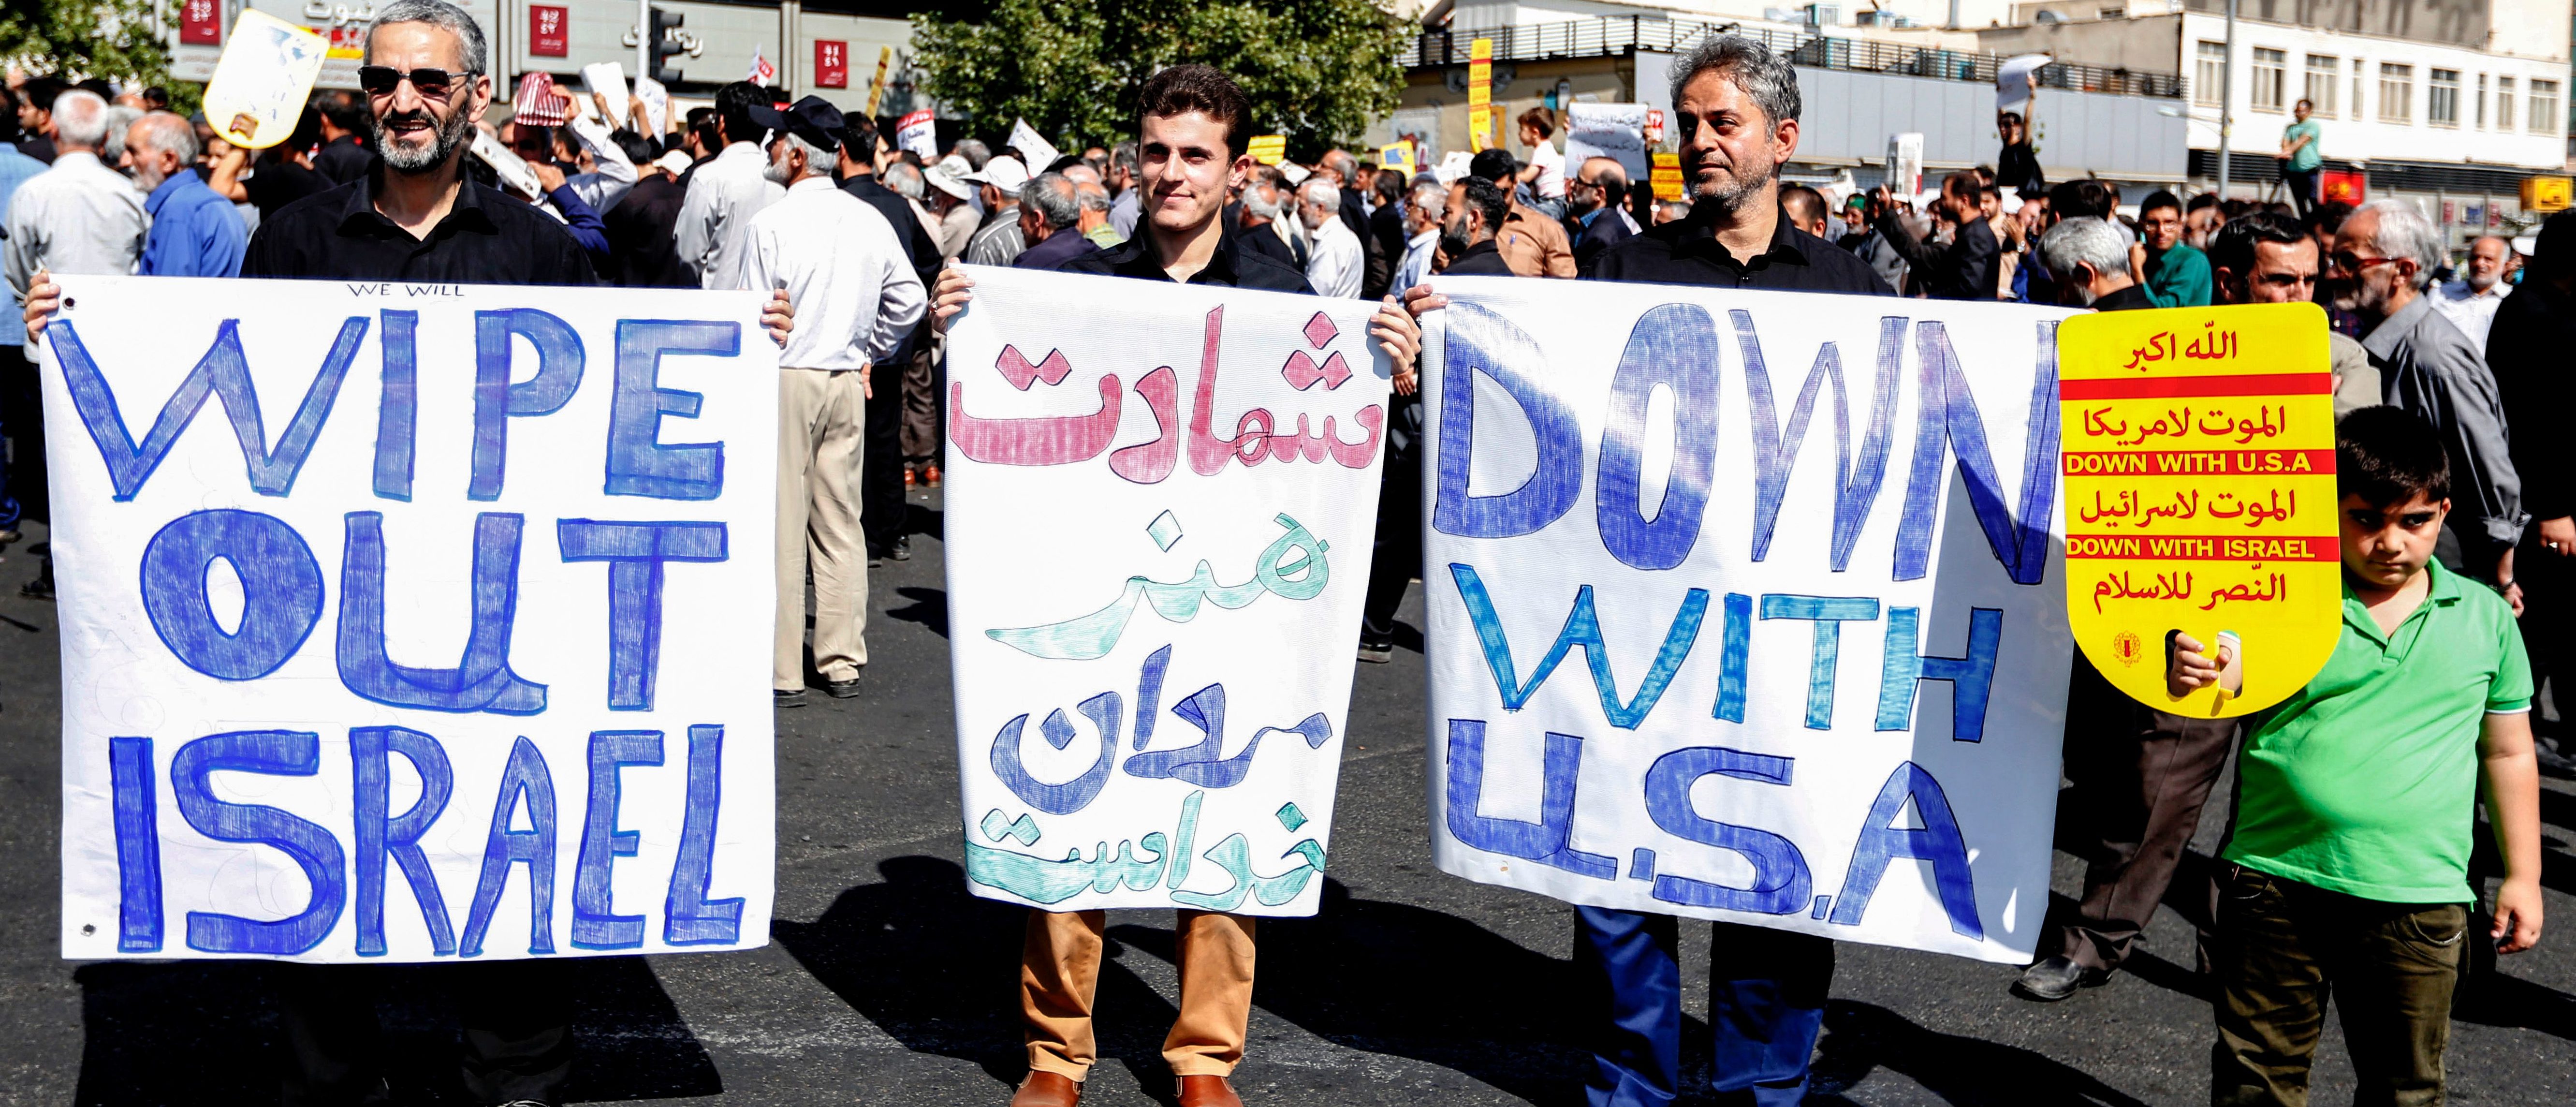 Iranians raise anti-US and anti-Israel signs during a demonstration following the weekly Muslim Friday prayer in the capital Tehran on September 28, 2018. (Photo by STRINGER / AFP) (Photo credit should read STRINGER/AFP/Getty Images)